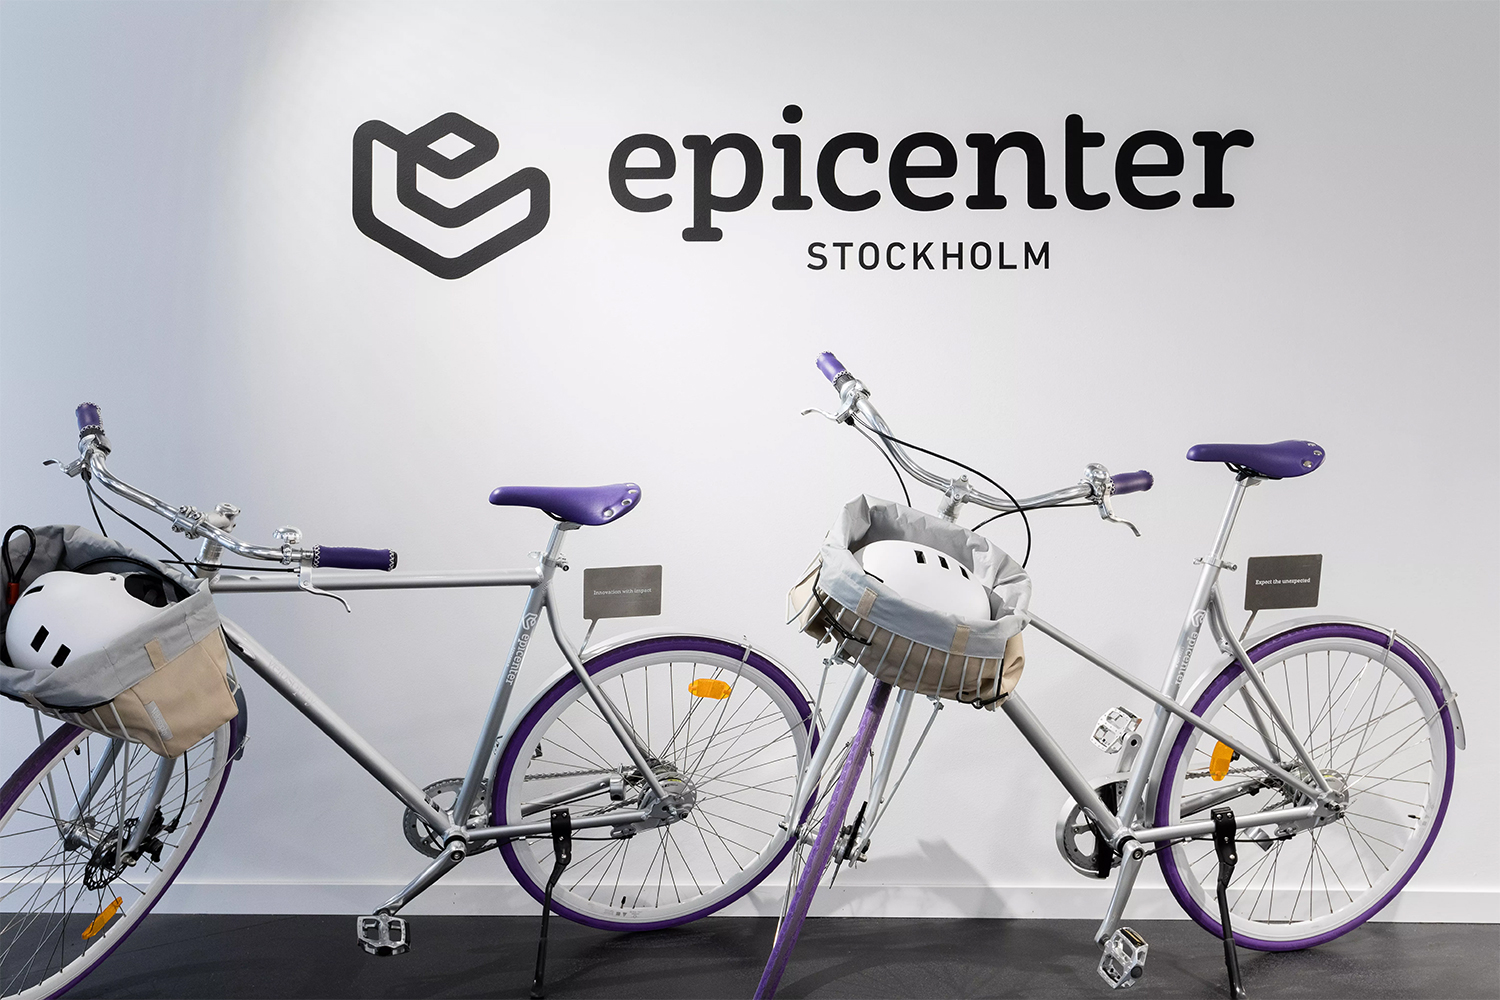 epicenter office of the future sweden